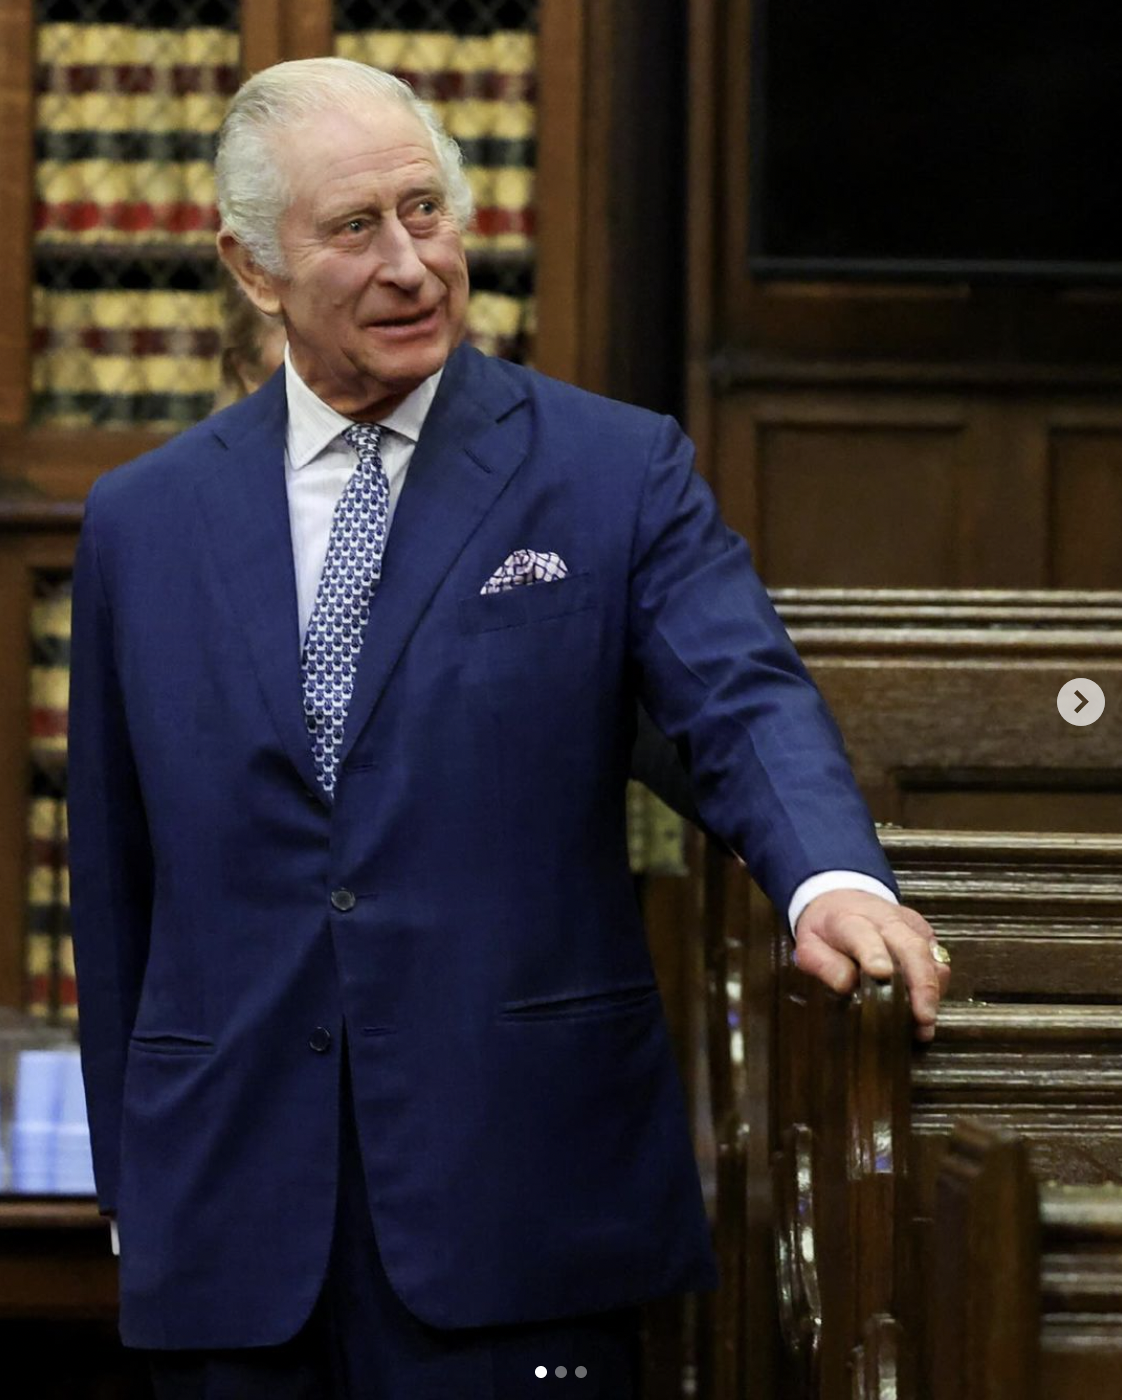 King Charles III during his visit to the Royal Courts of Justice as featured in The Royal Family's social media in December 2023 | Source: instagram/theroyalfamily